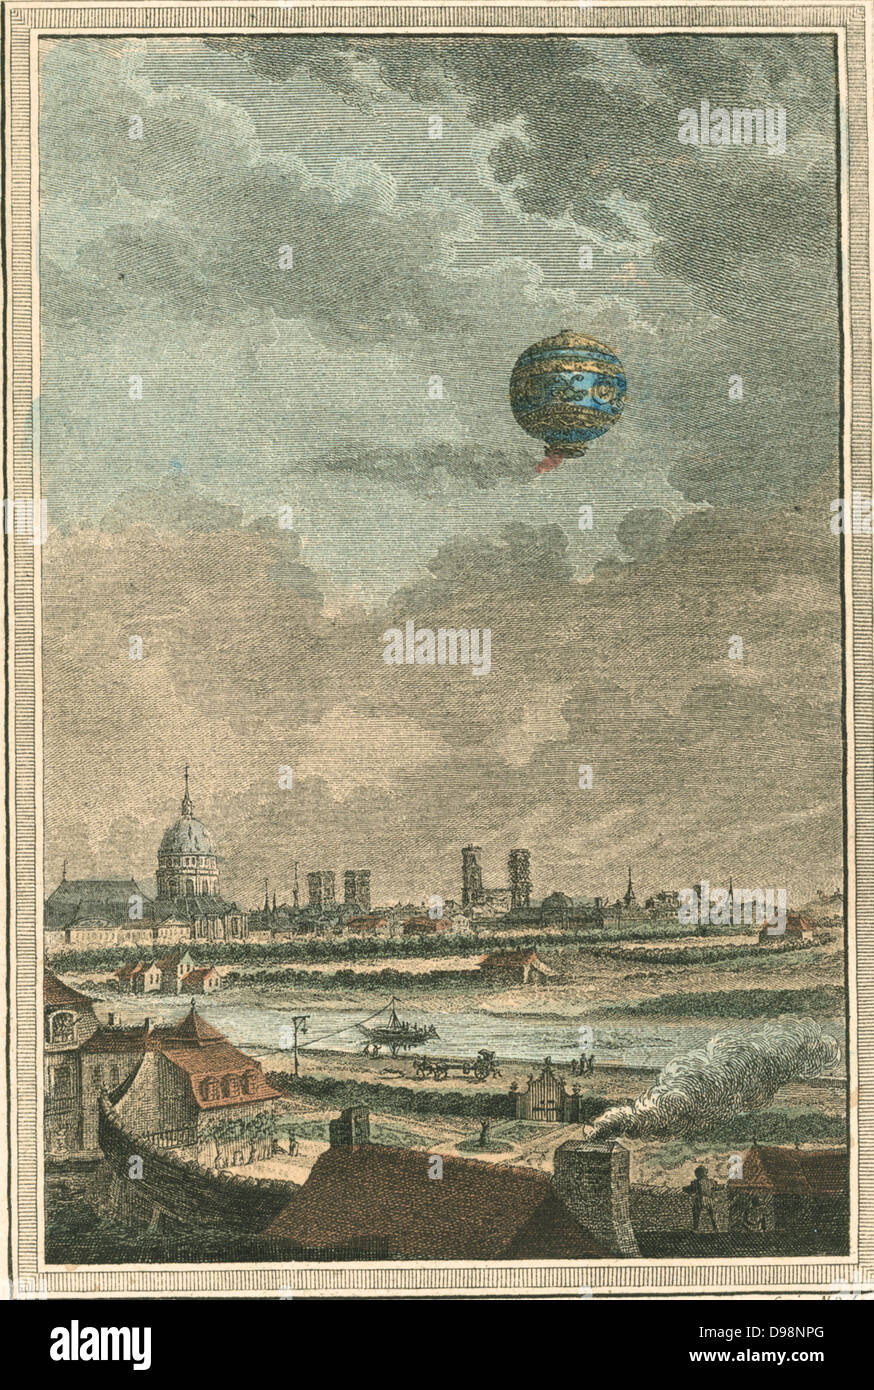 Montgolfier brothers' hot air hot air balloon over Paris, France, 1783. Engraving by Nicolas de Launay, French engraver. Flying Aeronautics Aviation Stock Photo